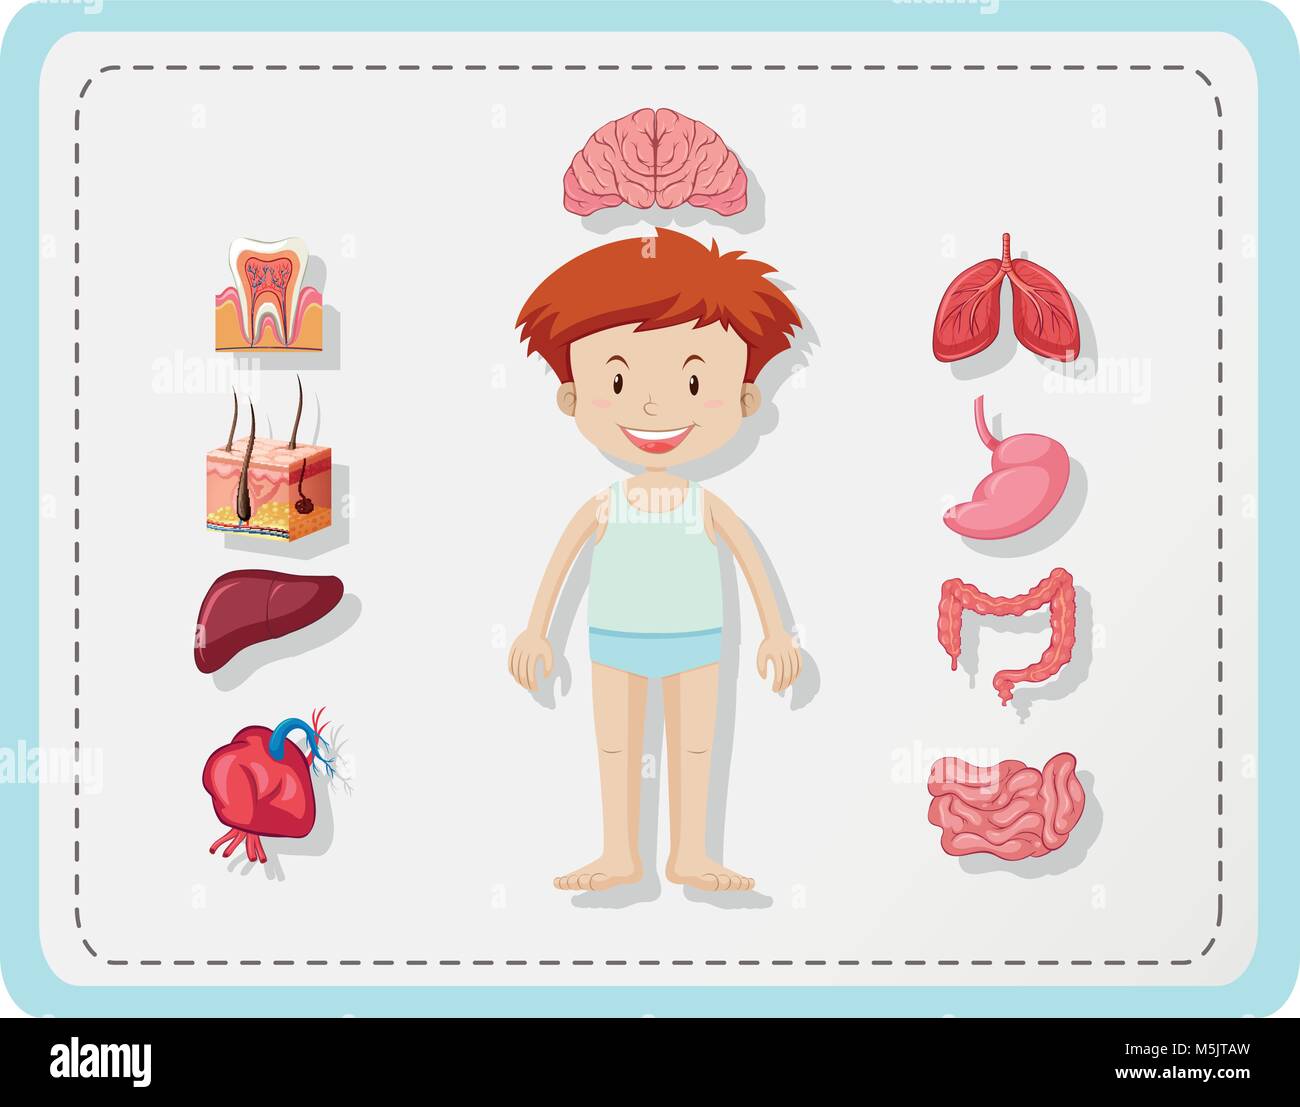 Boy and different parts of body illustration Stock Vector